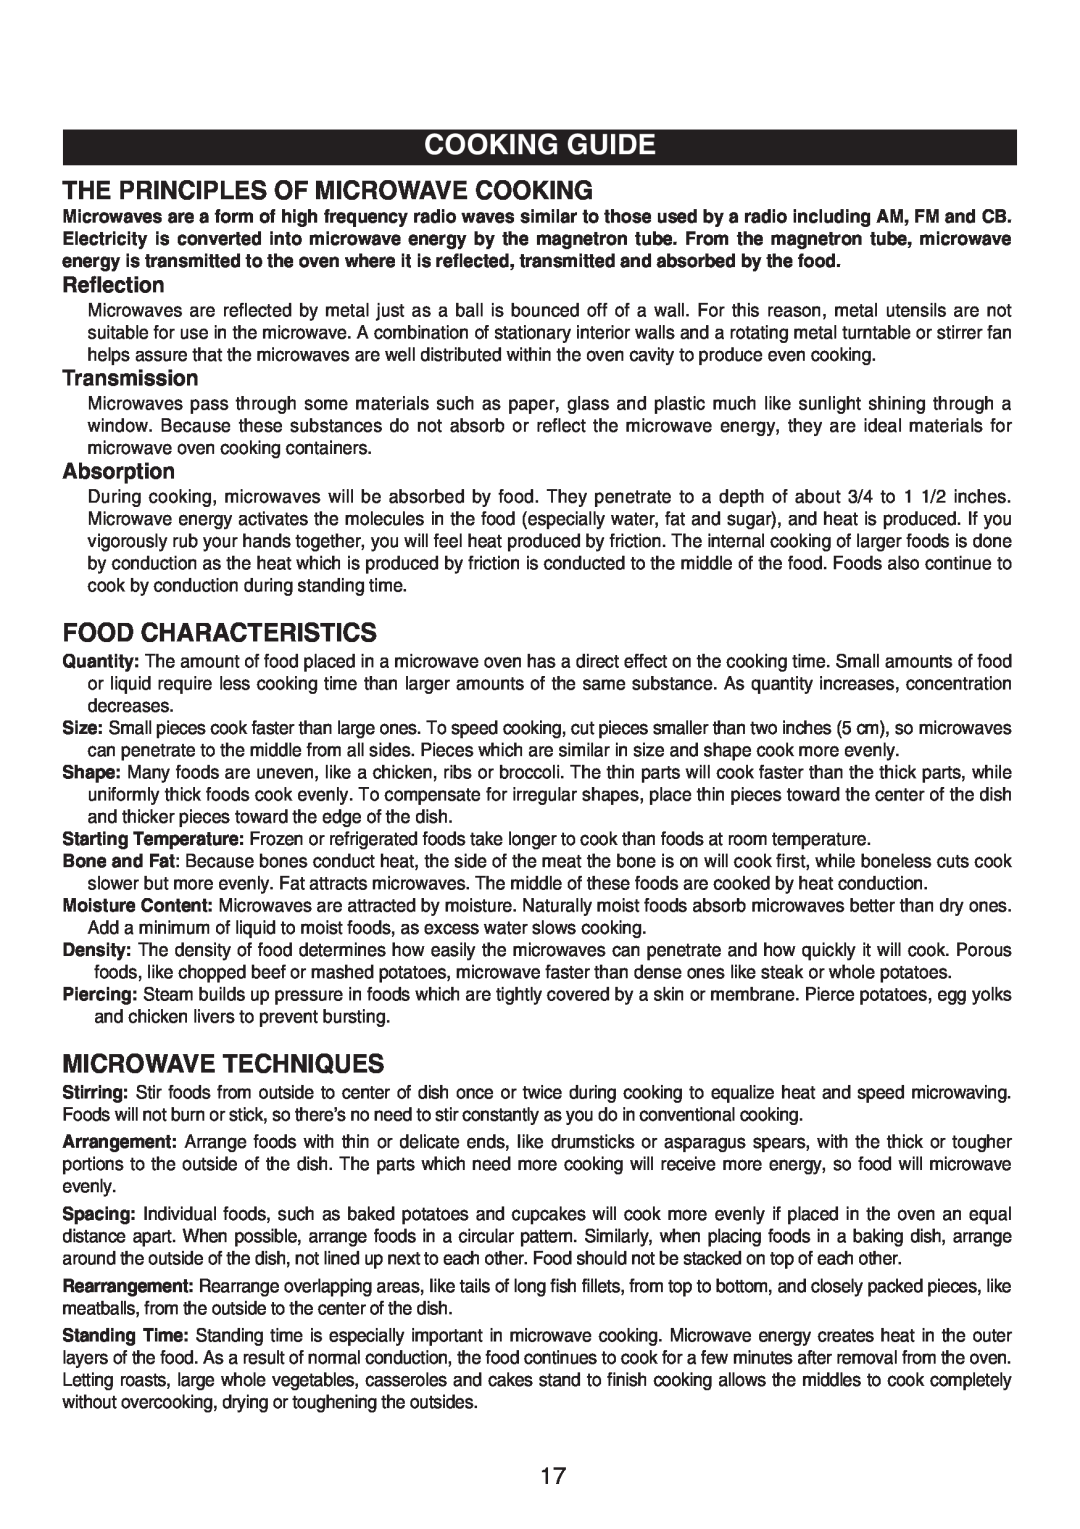 Emerson MW8991SB Cooking Guide, The Principles Of Microwave Cooking, Food Characteristics, Microwave Techniques 